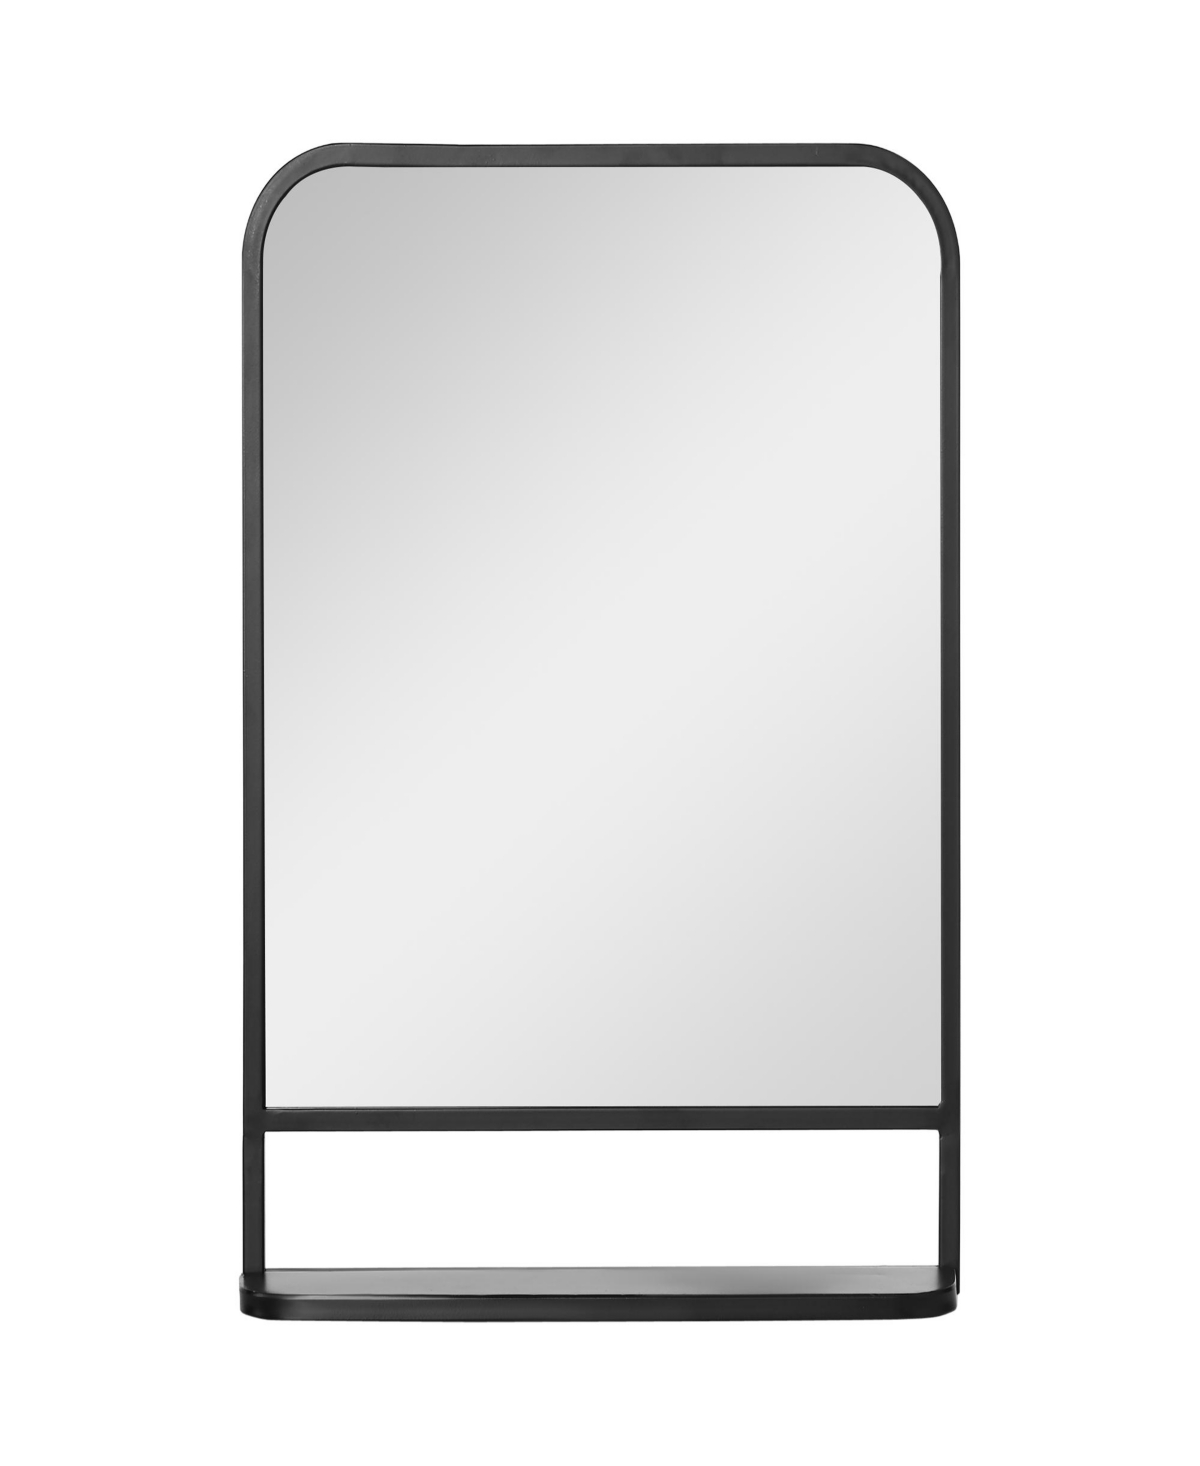 34" x 21" Rectangle Modern Wall Mirror with Storage Shelf, Mirrors for Wall in Living Room, Bedroom, Black - Black